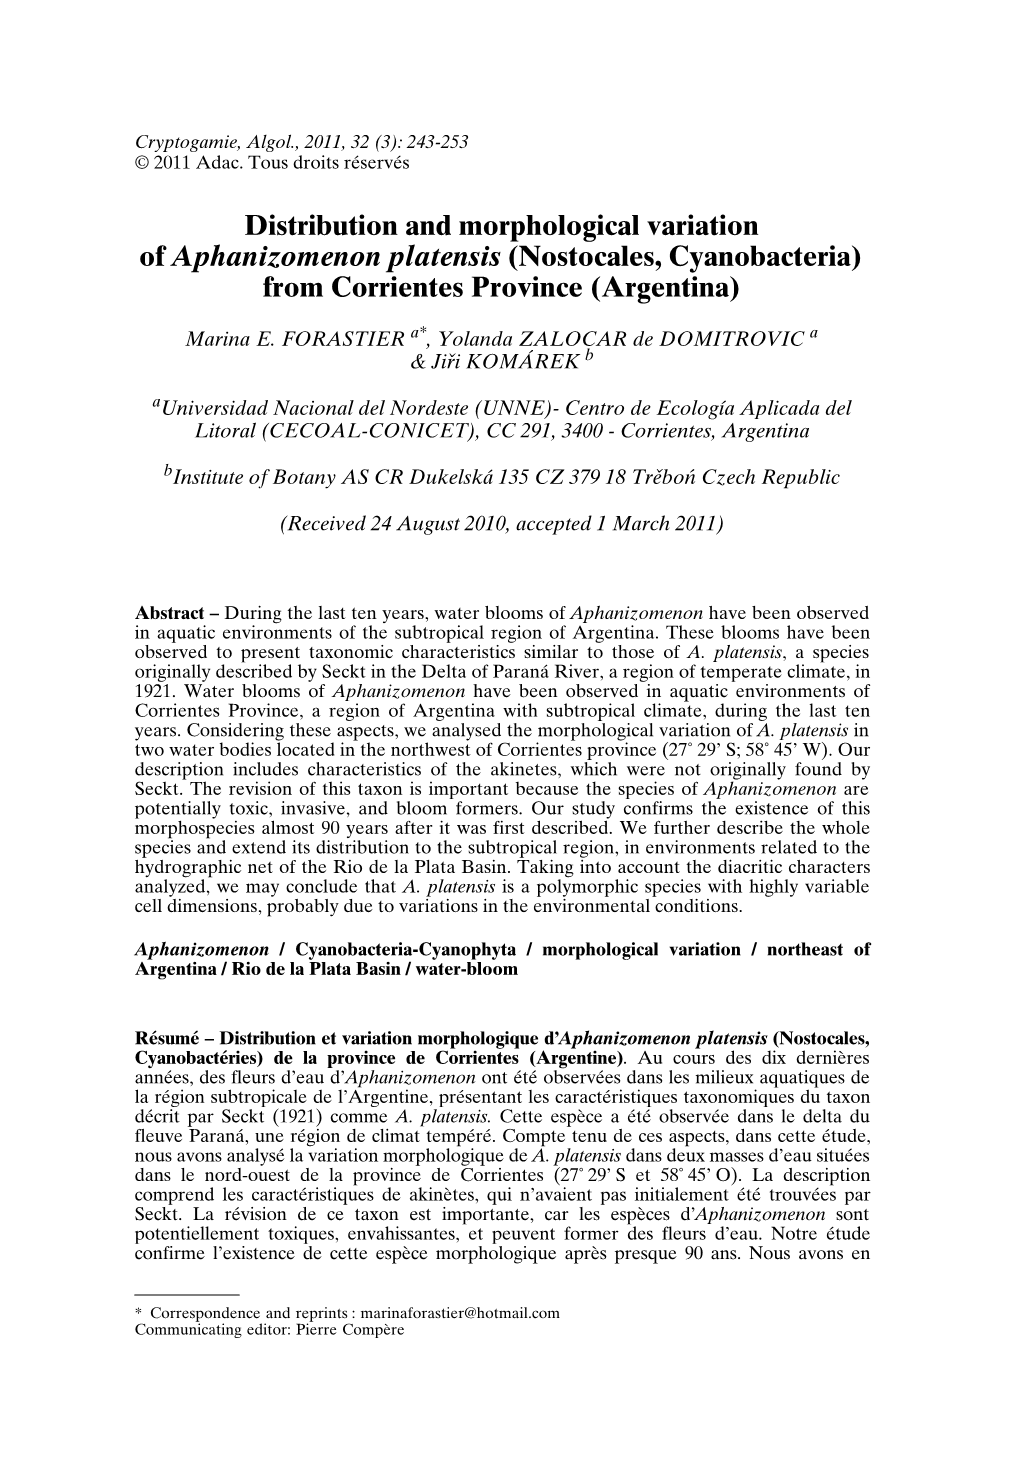 Distribution and Morphological Variation of Aphanizomenon Platensis (Nostocales, Cyanobacteria) from Corrientes Province (Argentina)